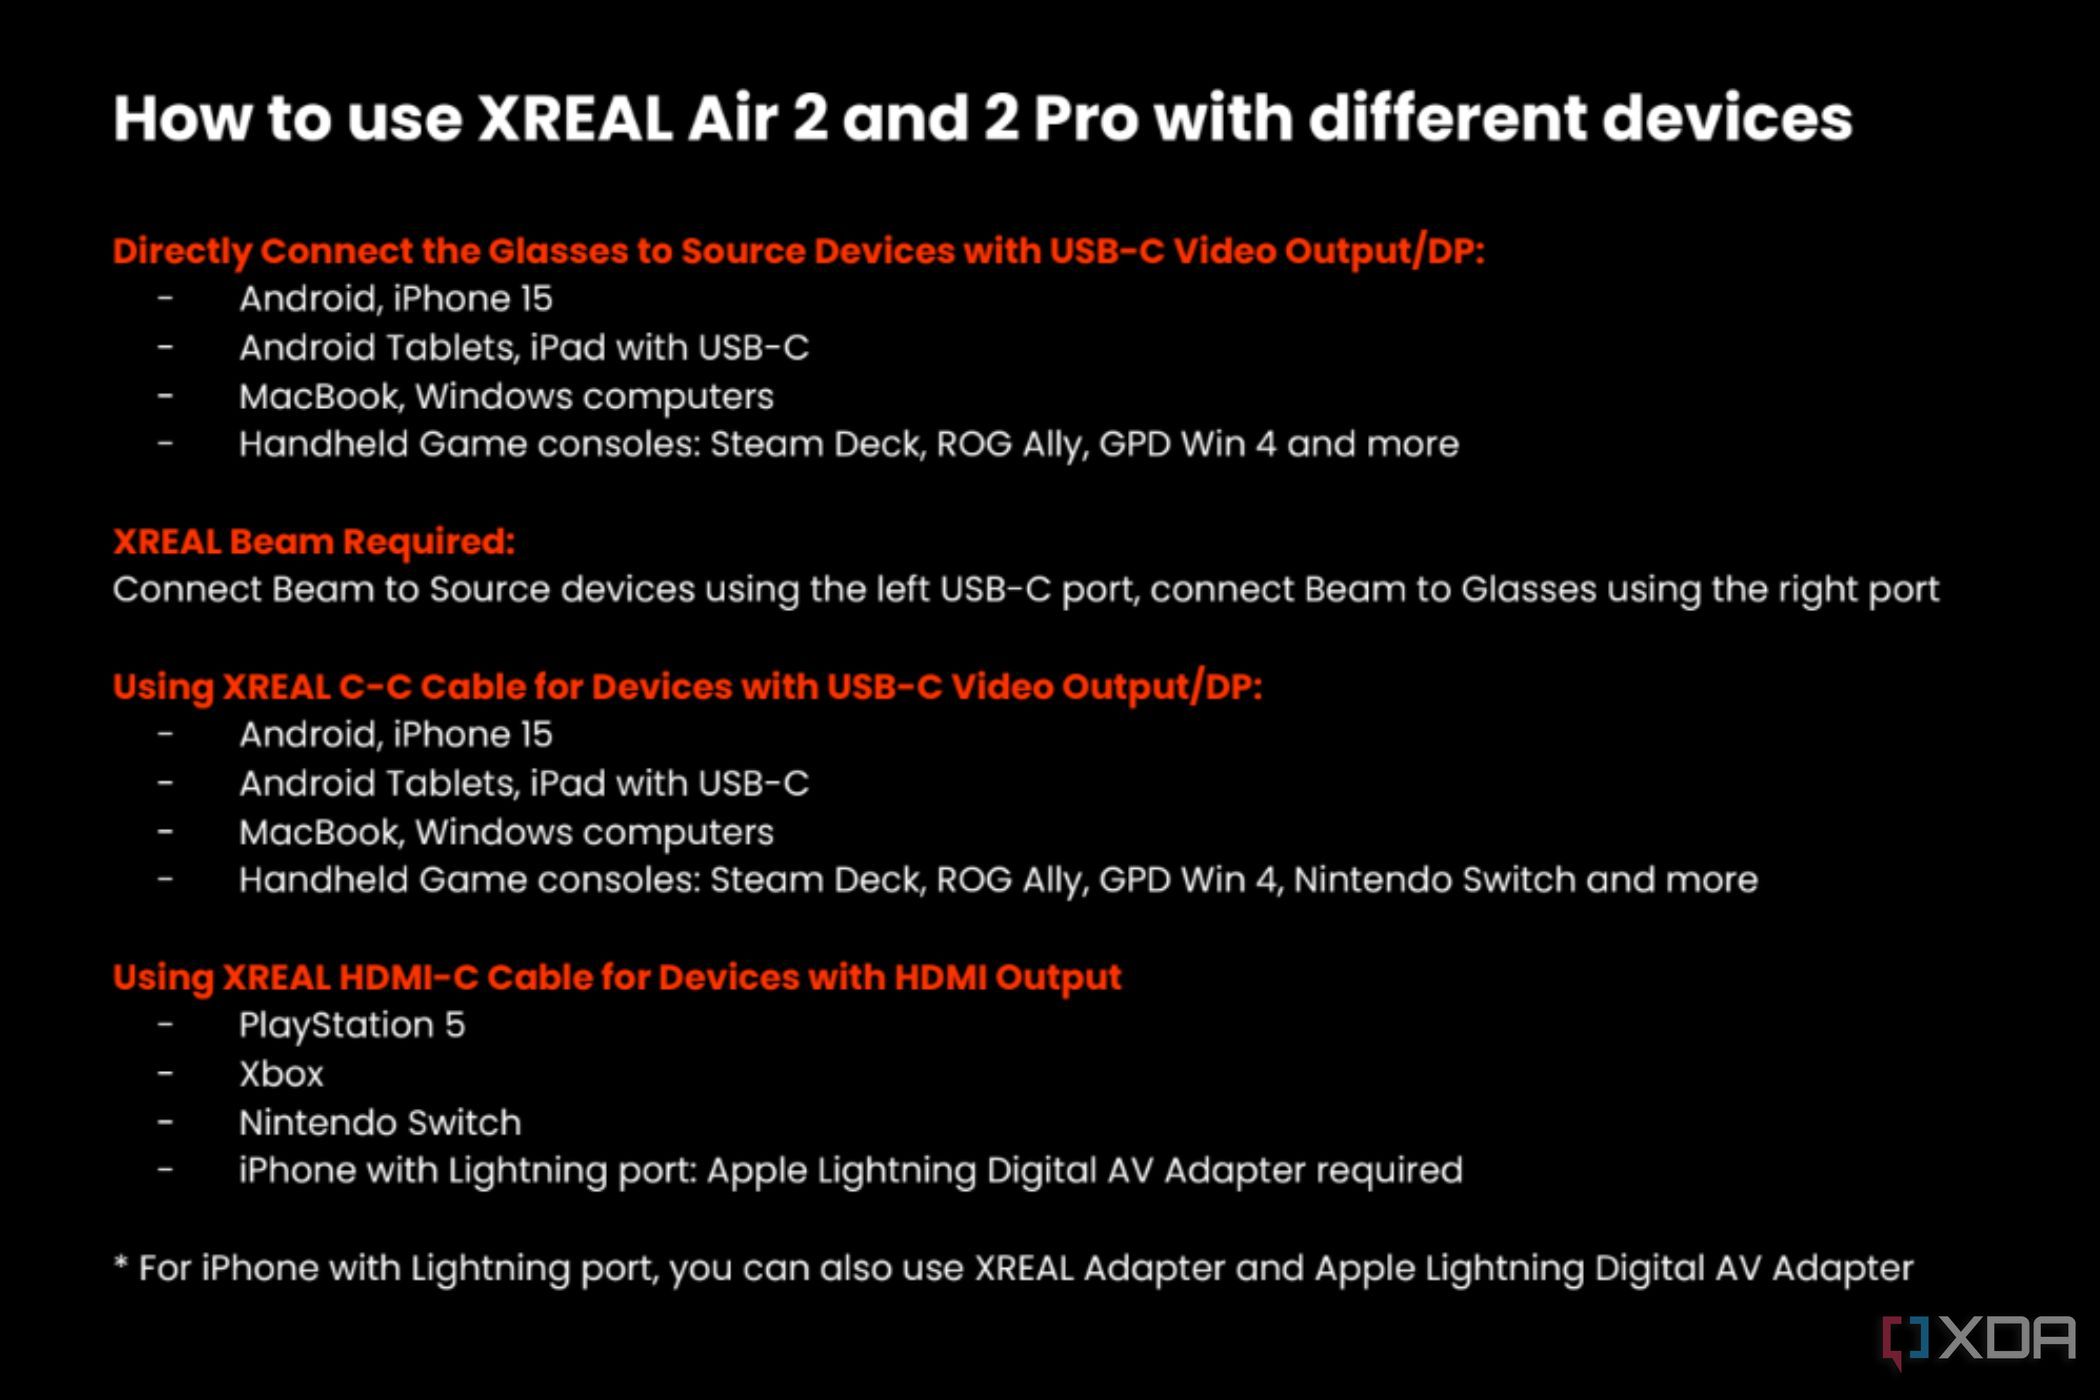 A screenshot showing text describing the connectivity options for XREAL Air 2.